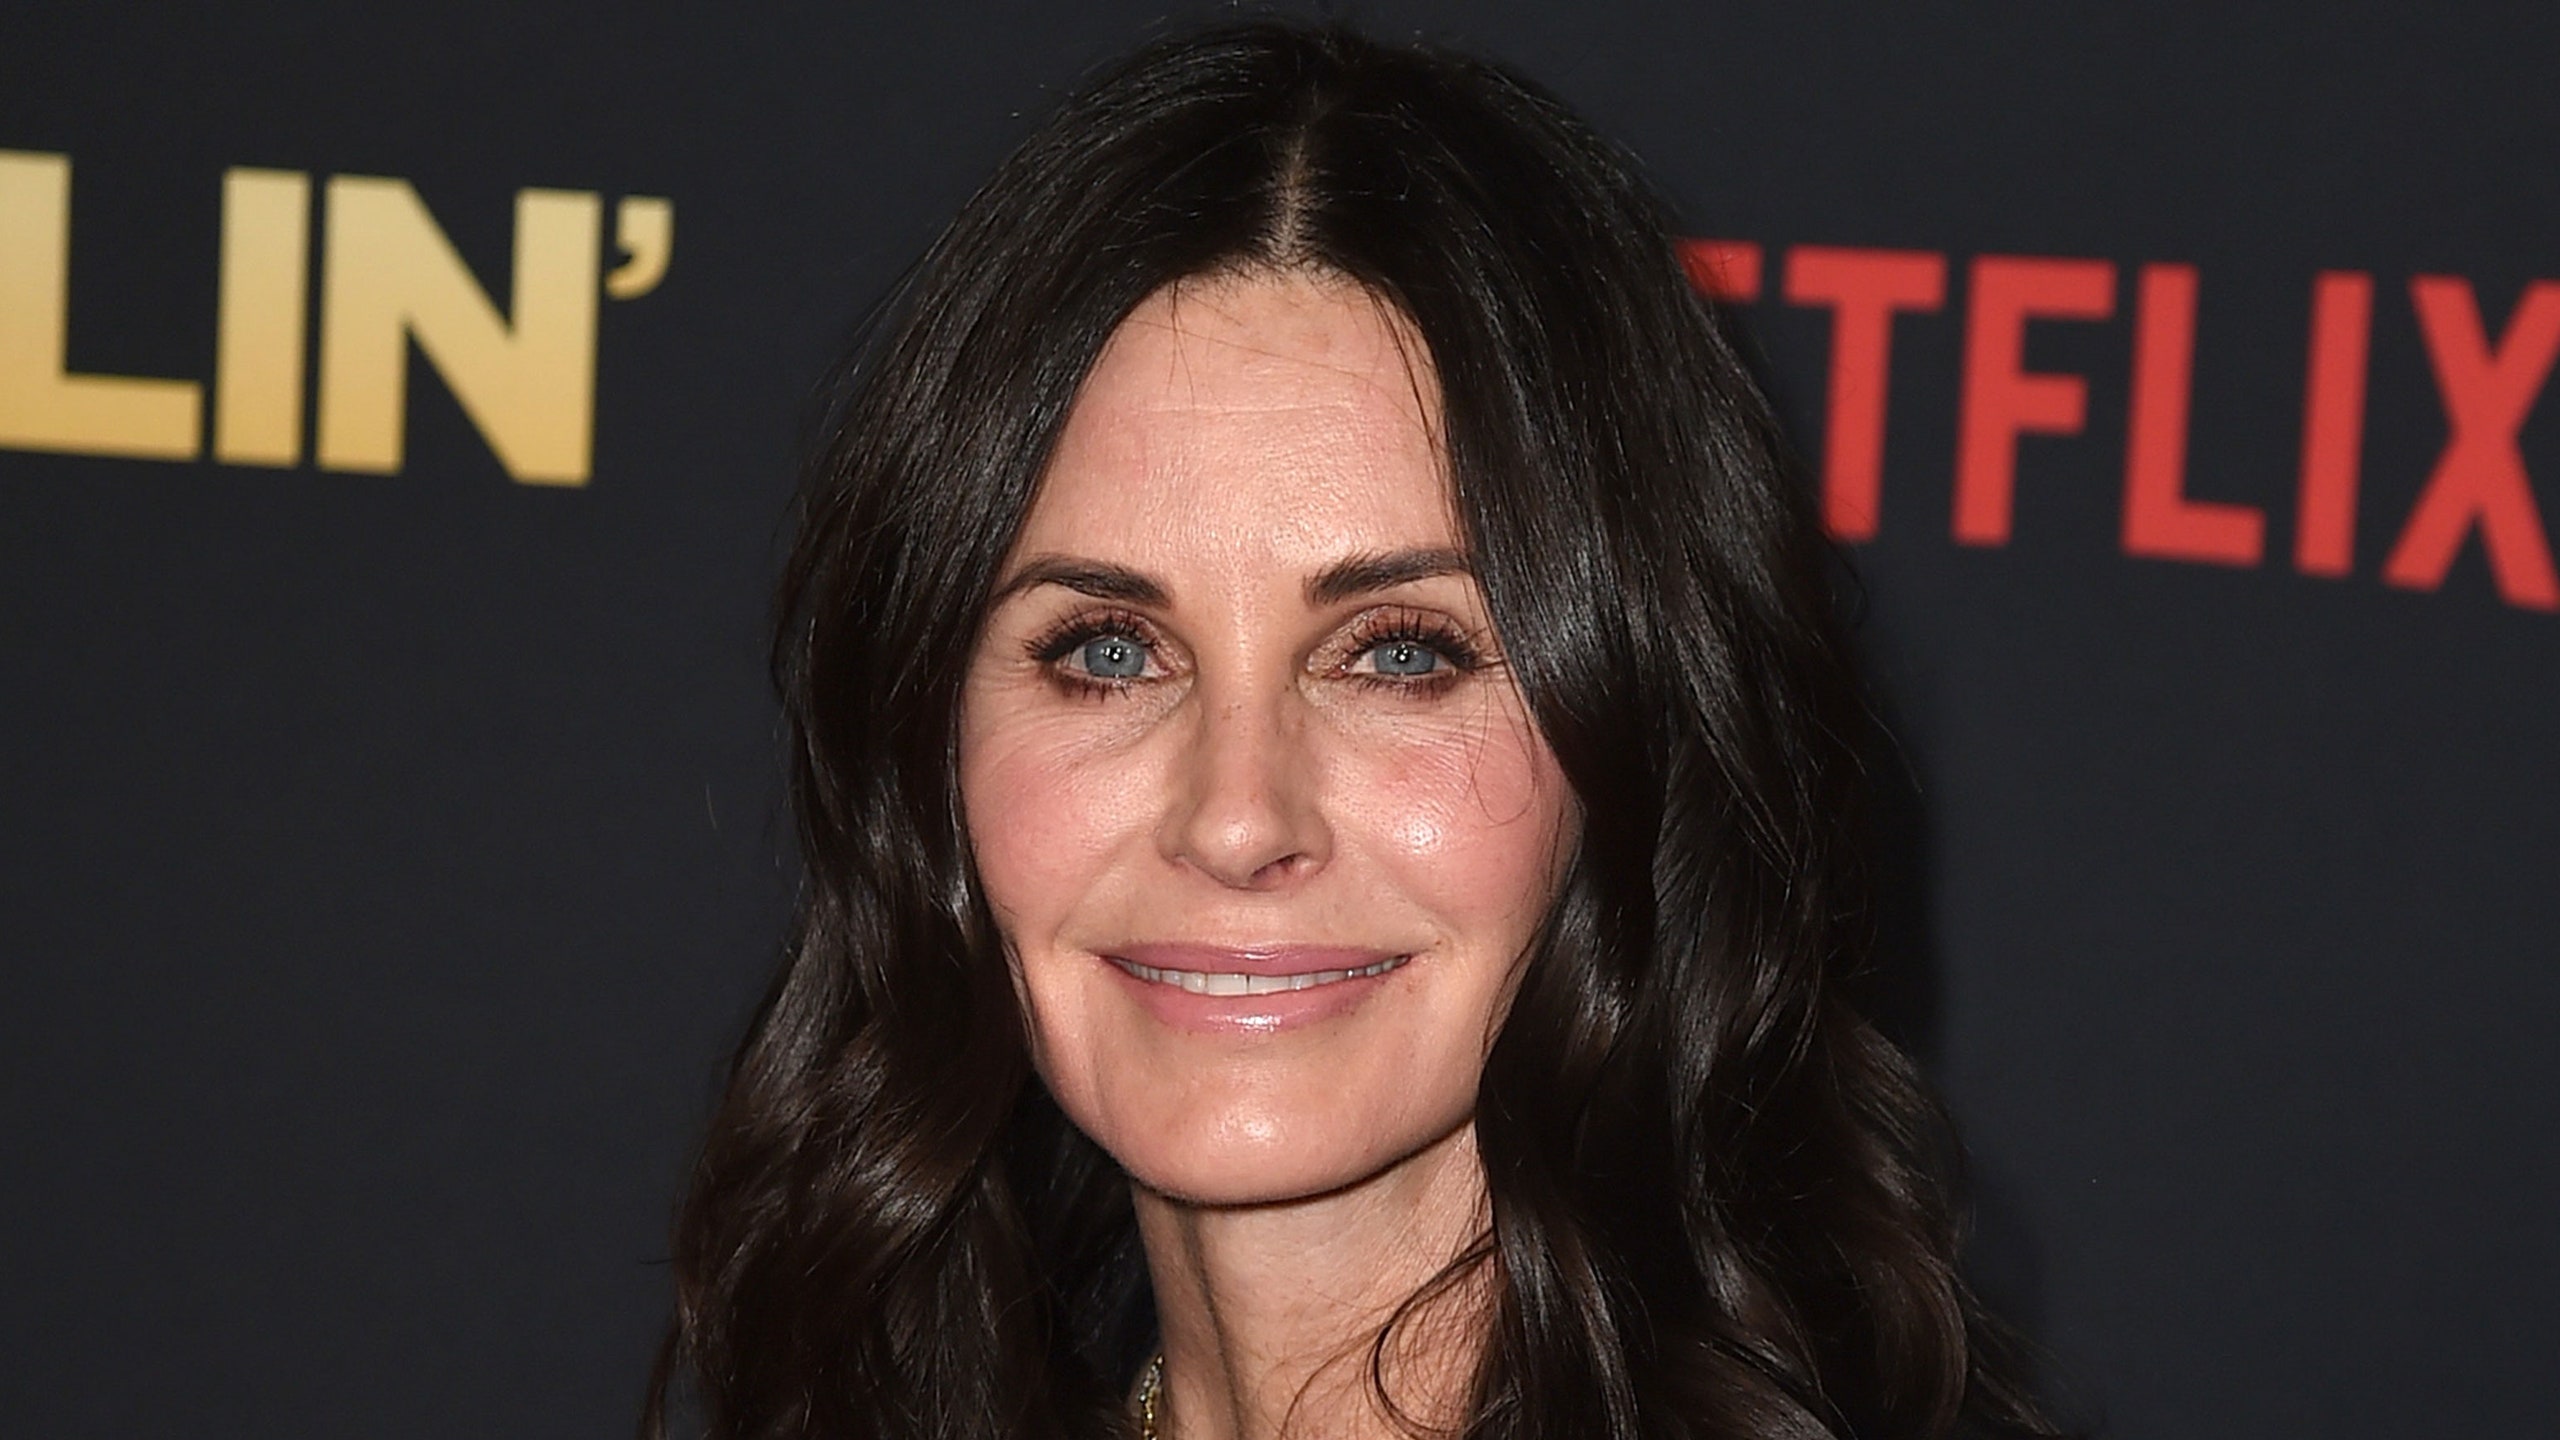 Courteney Cox Wiki, Bio, Age, Net Worth, and Other Facts